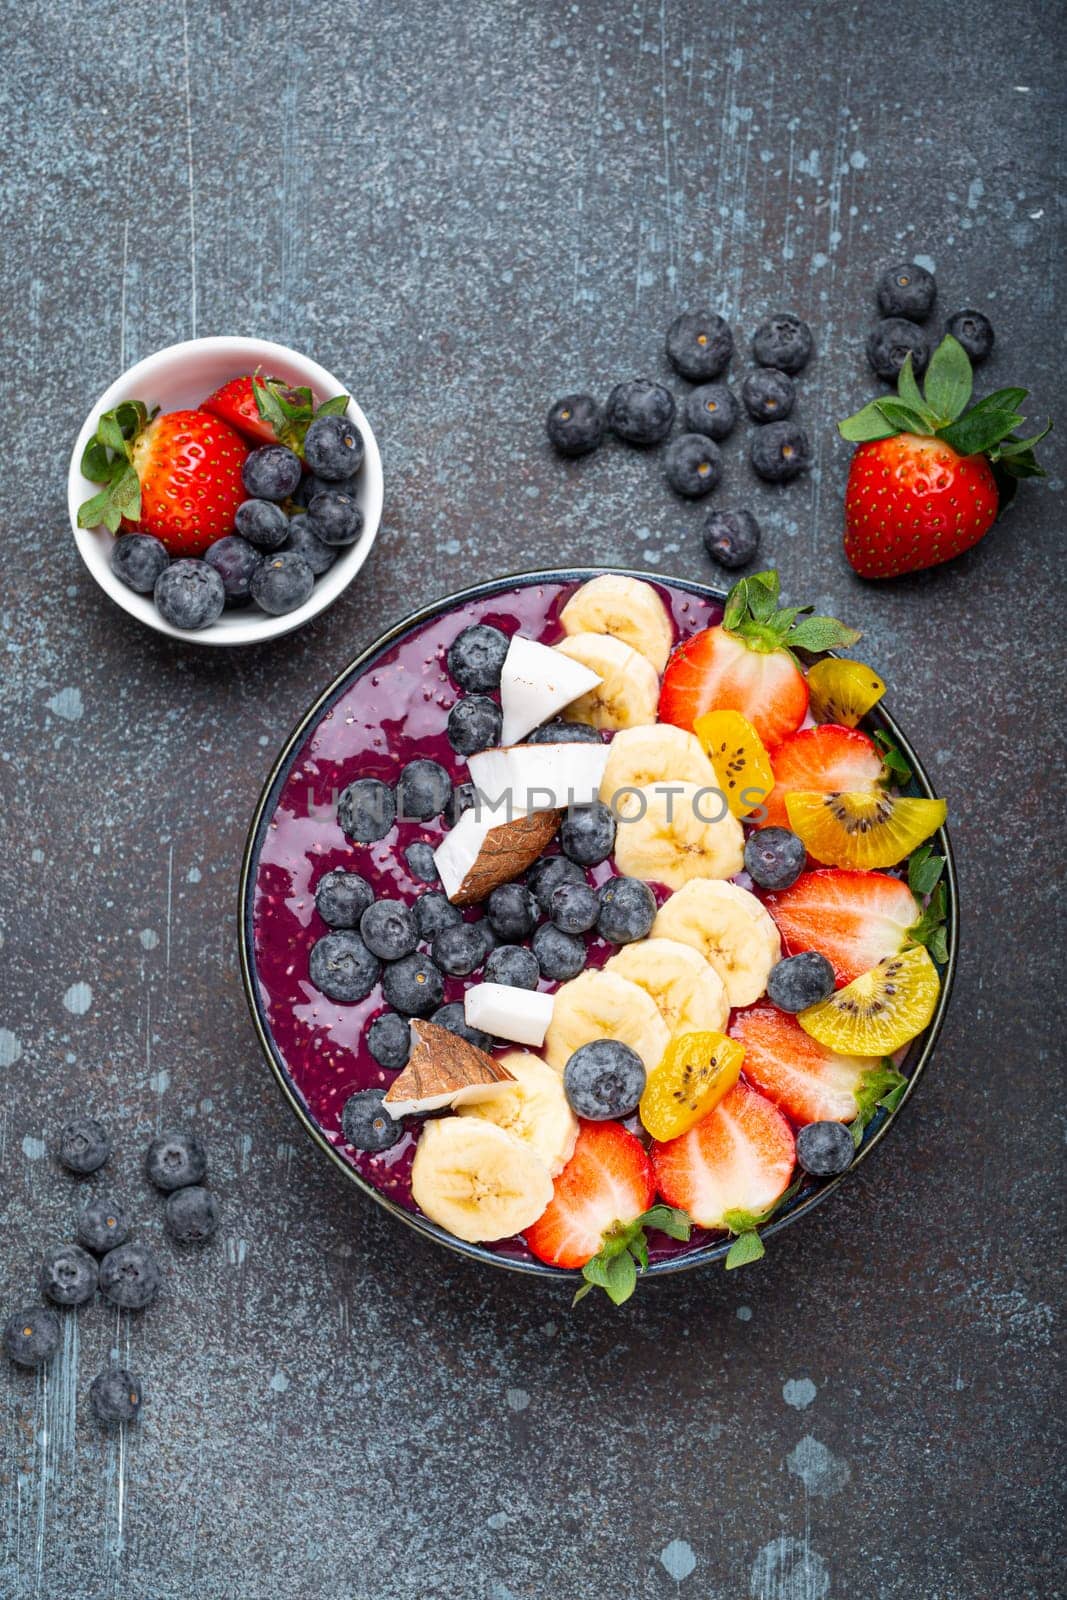 Healthy summer acai smoothie bowl with chia seeds, fresh banana, strawberry, blueberry, cocos, kiwi top view on rustic concrete background with spoon